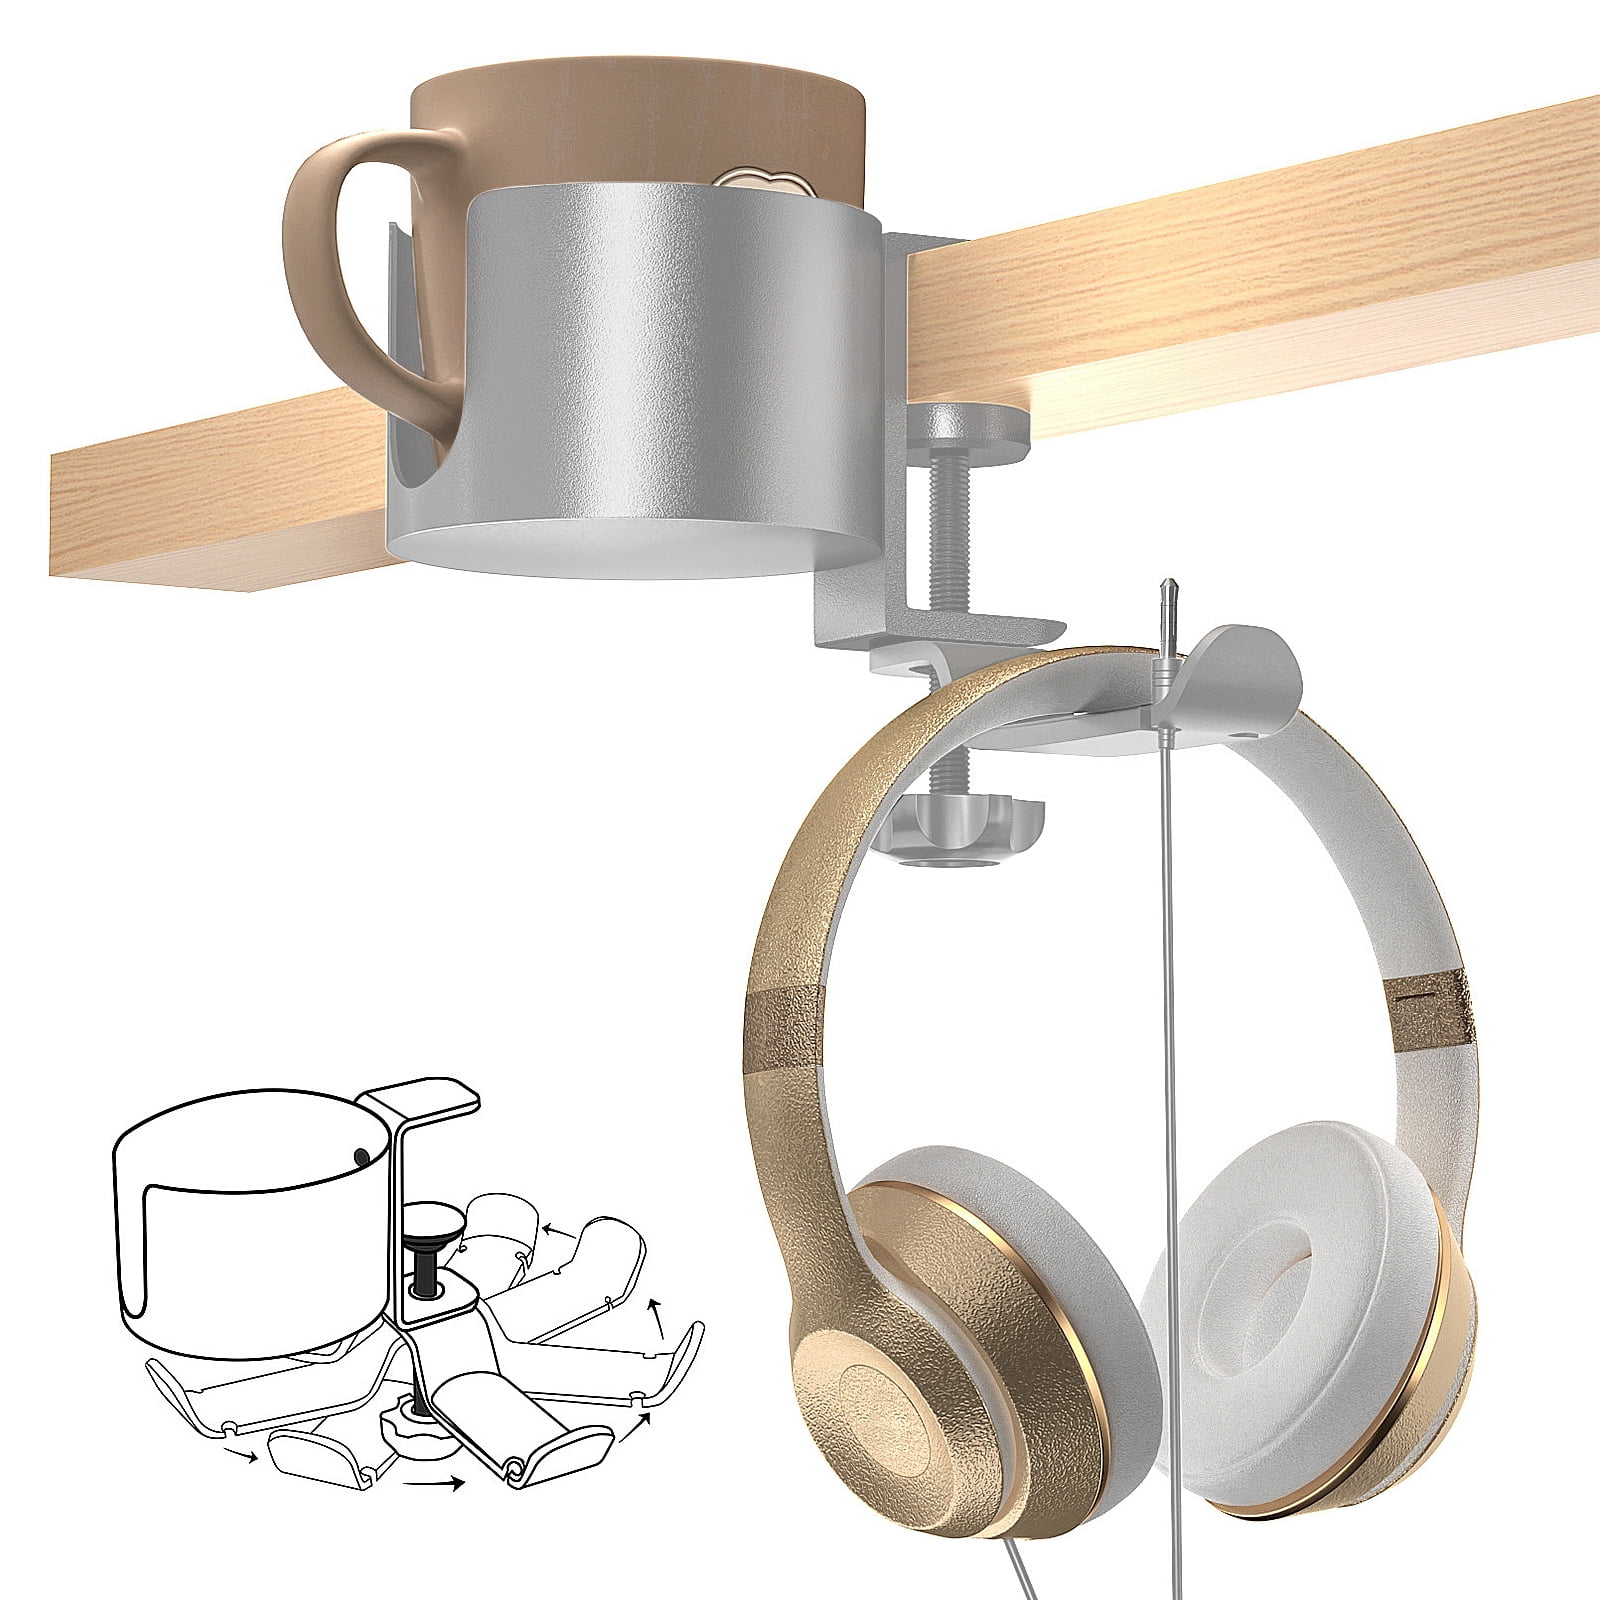  AirTaxiing Desk Cup Holder with Headphone Hanger for Desk in  Home, Anti-Spill Cup Holder for Desk, Table Cup Holder for Water Bottles,  Wheelchairs, Workstations, Gaming Desk Accessories : Home & Kitchen